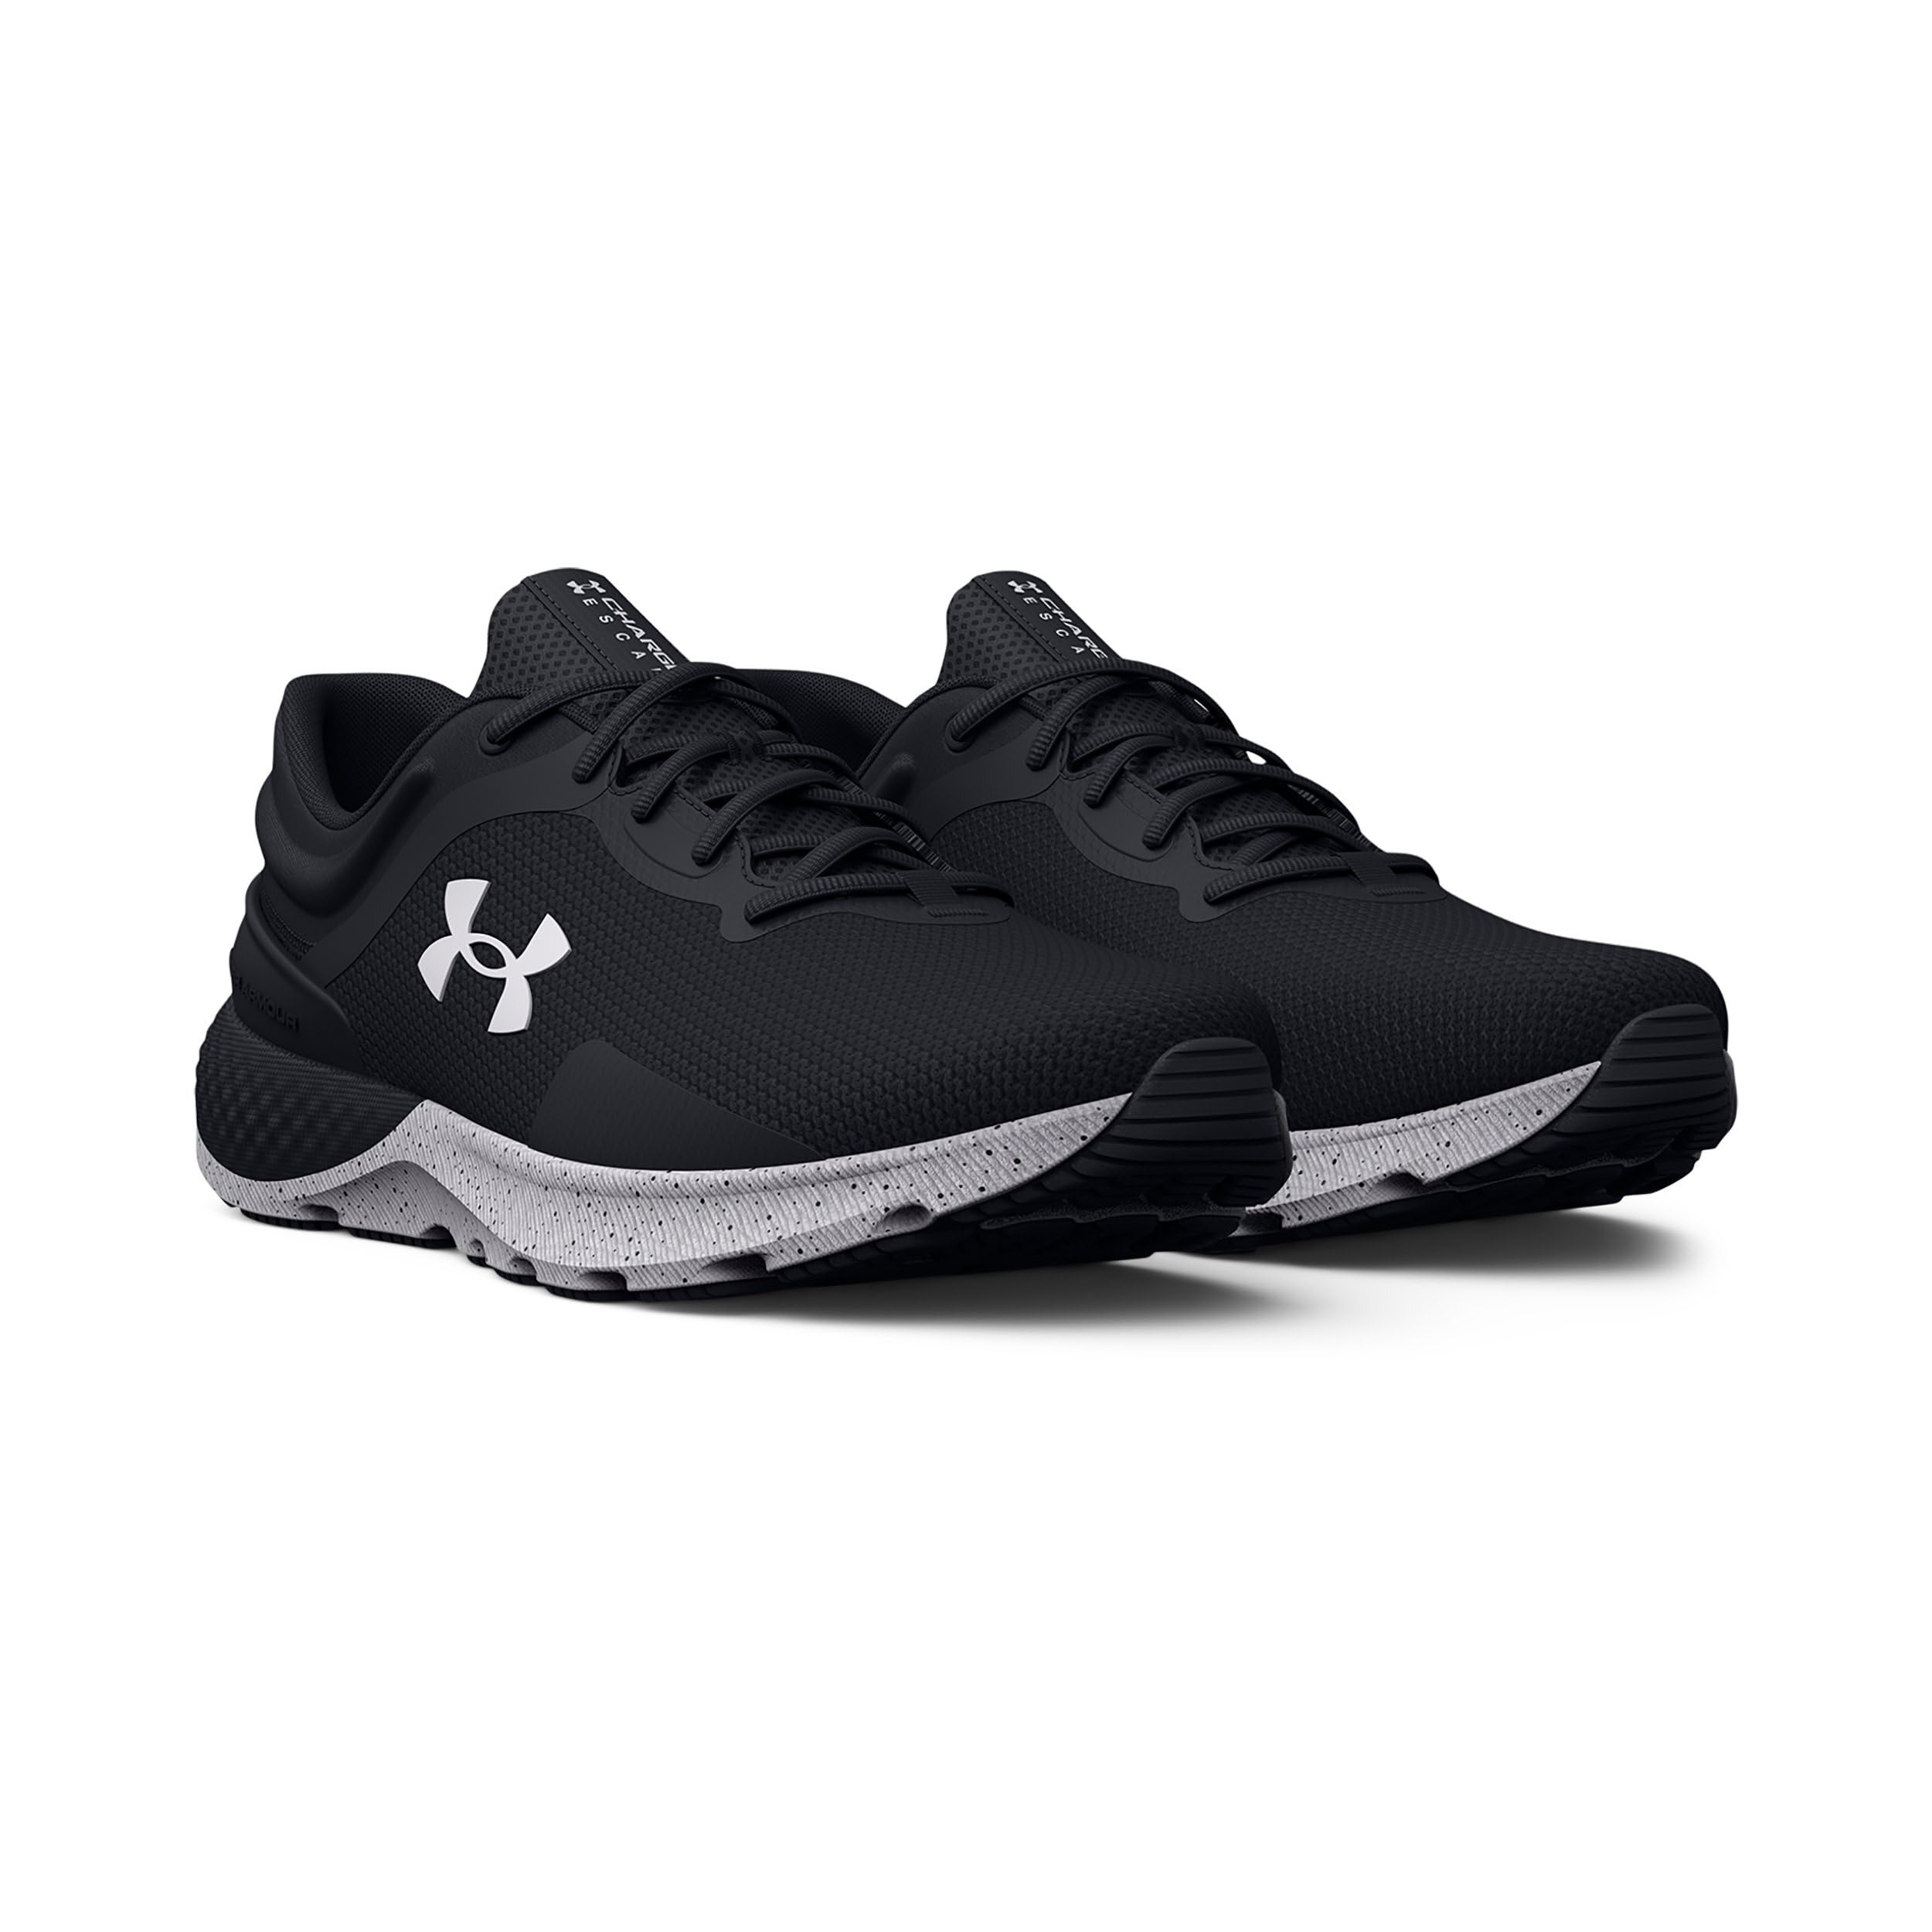 Under Armour Women's Charged Escape 4 Running Shoe, (002) Black/Black/White, 8